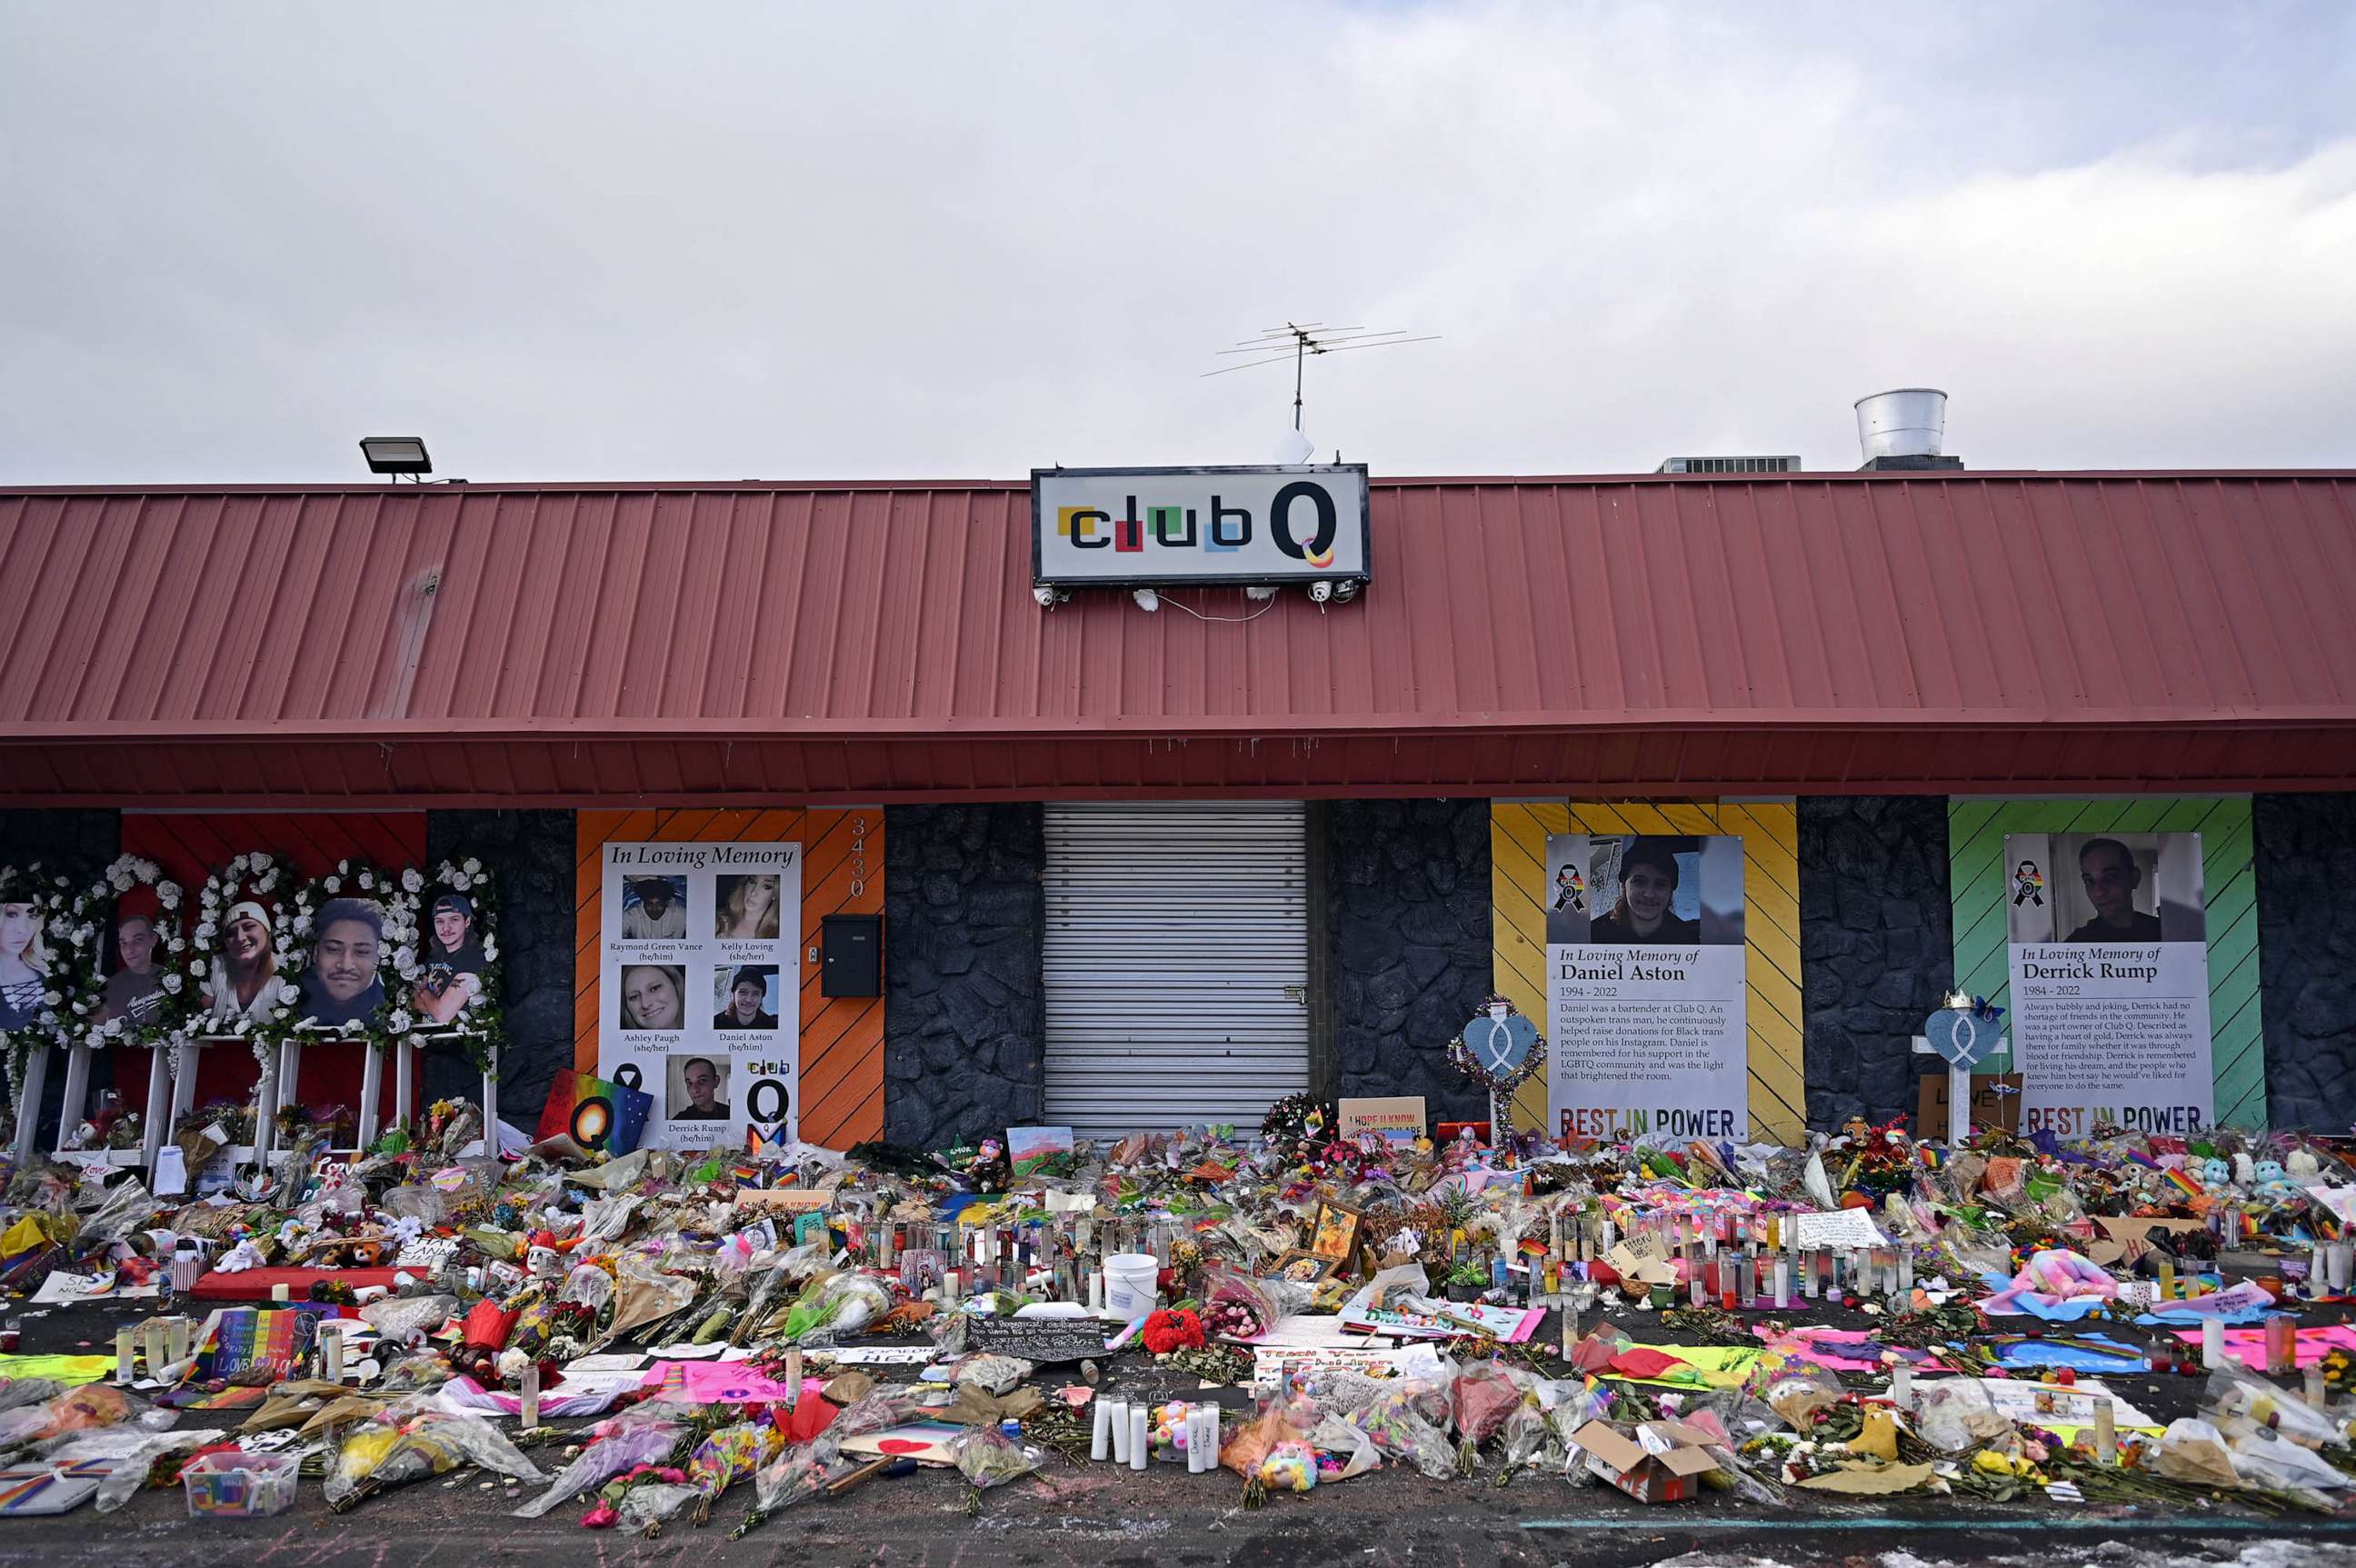 PHOTO: Club Q and the memorial for the victims of the shooting photographed in Colorado Springs, Colo., Nov. 29, 2022.